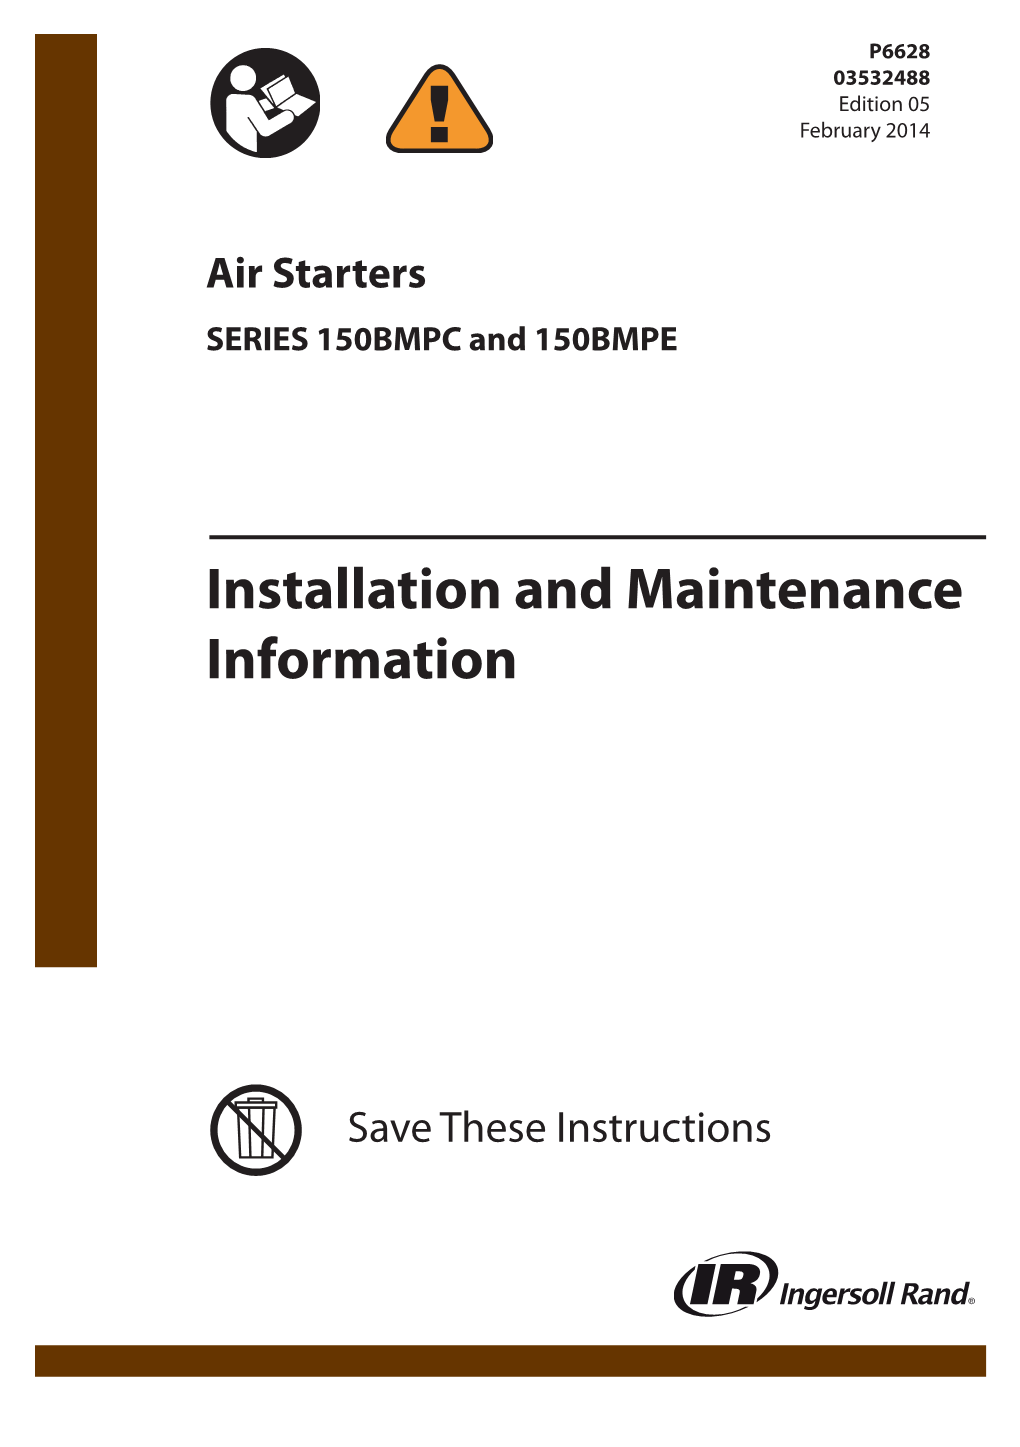 Installation and Maintenance Information, Air Starters